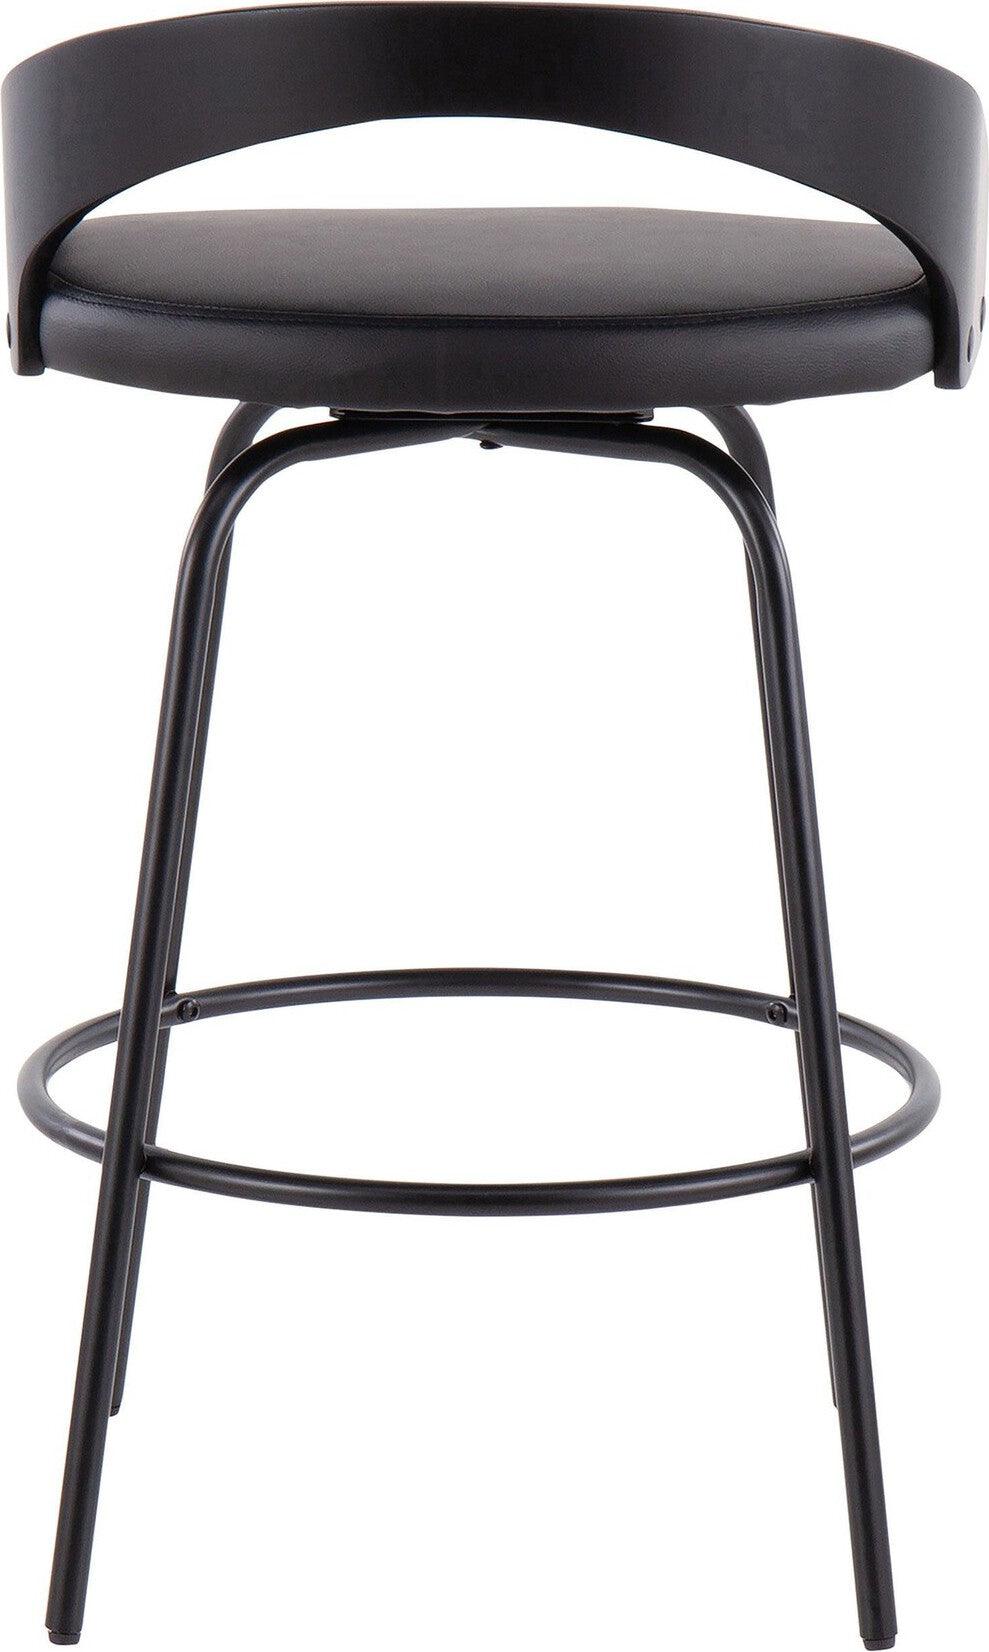 Lumisource Barstools - Grotto Claire Swivel Fixed Height Counter Stool (Set of 2) Black